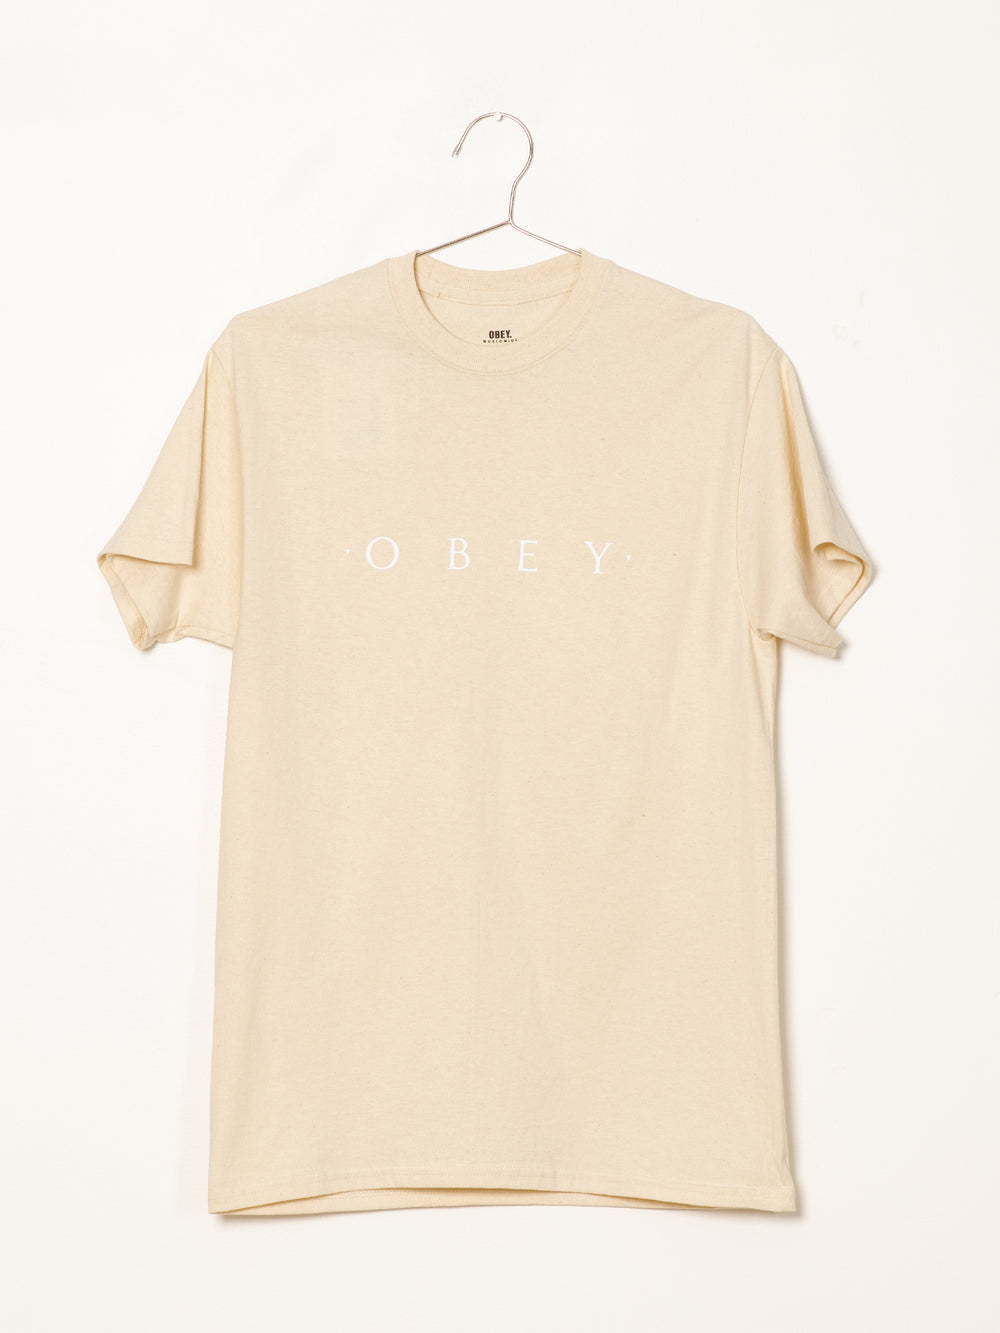 ETERNAL OBEY T-SHIRT  - CLEARANCE